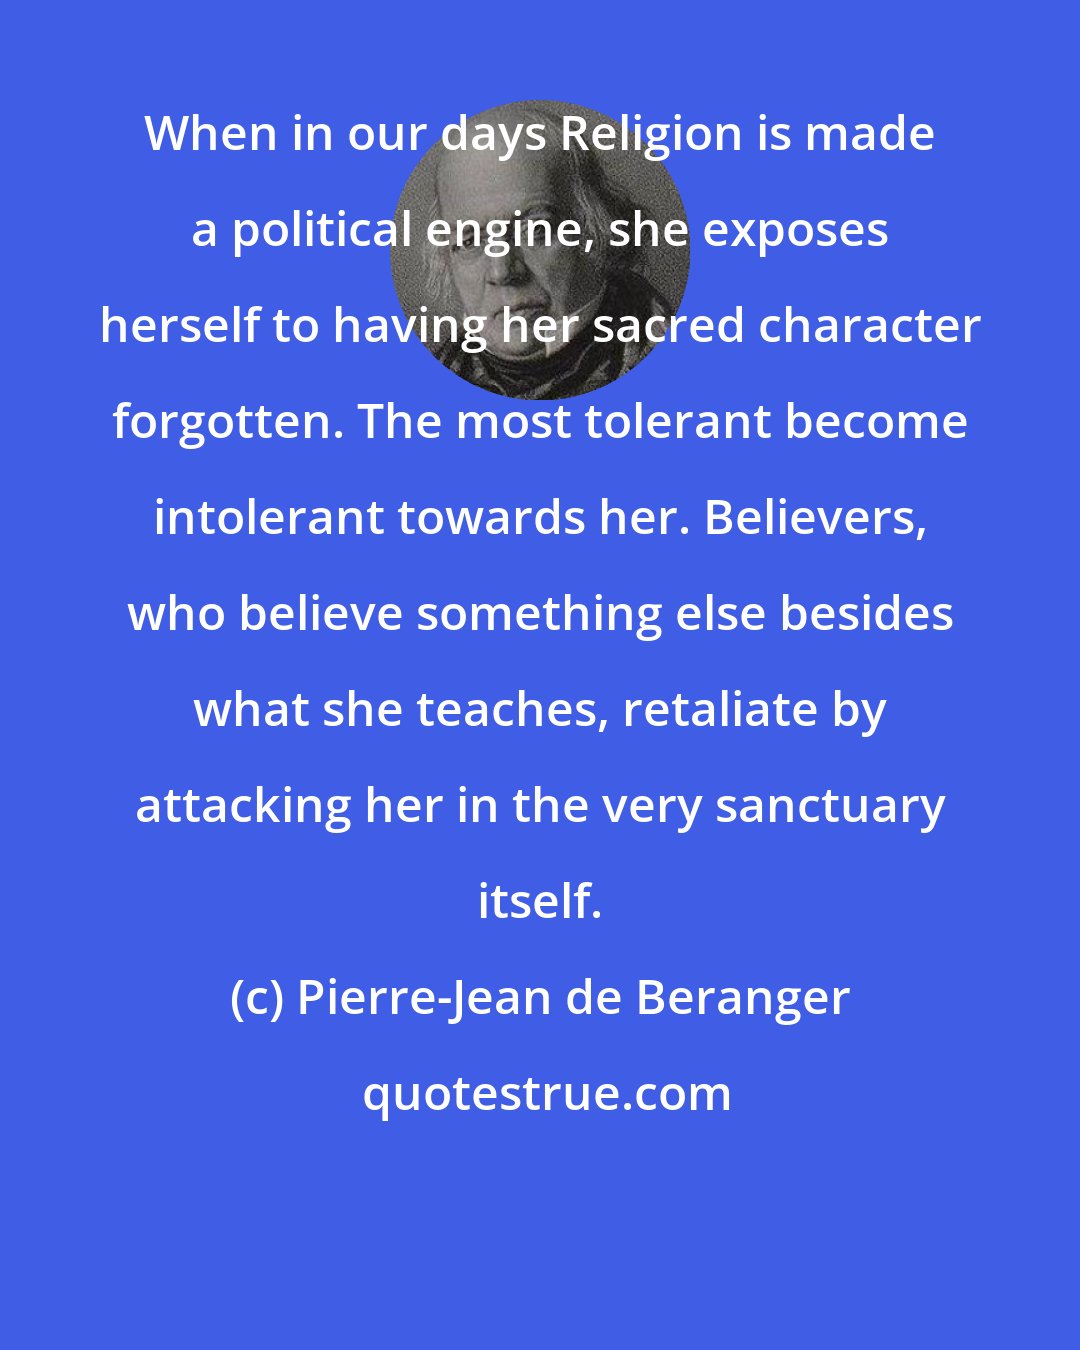 Pierre-Jean de Beranger: When in our days Religion is made a political engine, she exposes herself to having her sacred character forgotten. The most tolerant become intolerant towards her. Believers, who believe something else besides what she teaches, retaliate by attacking her in the very sanctuary itself.